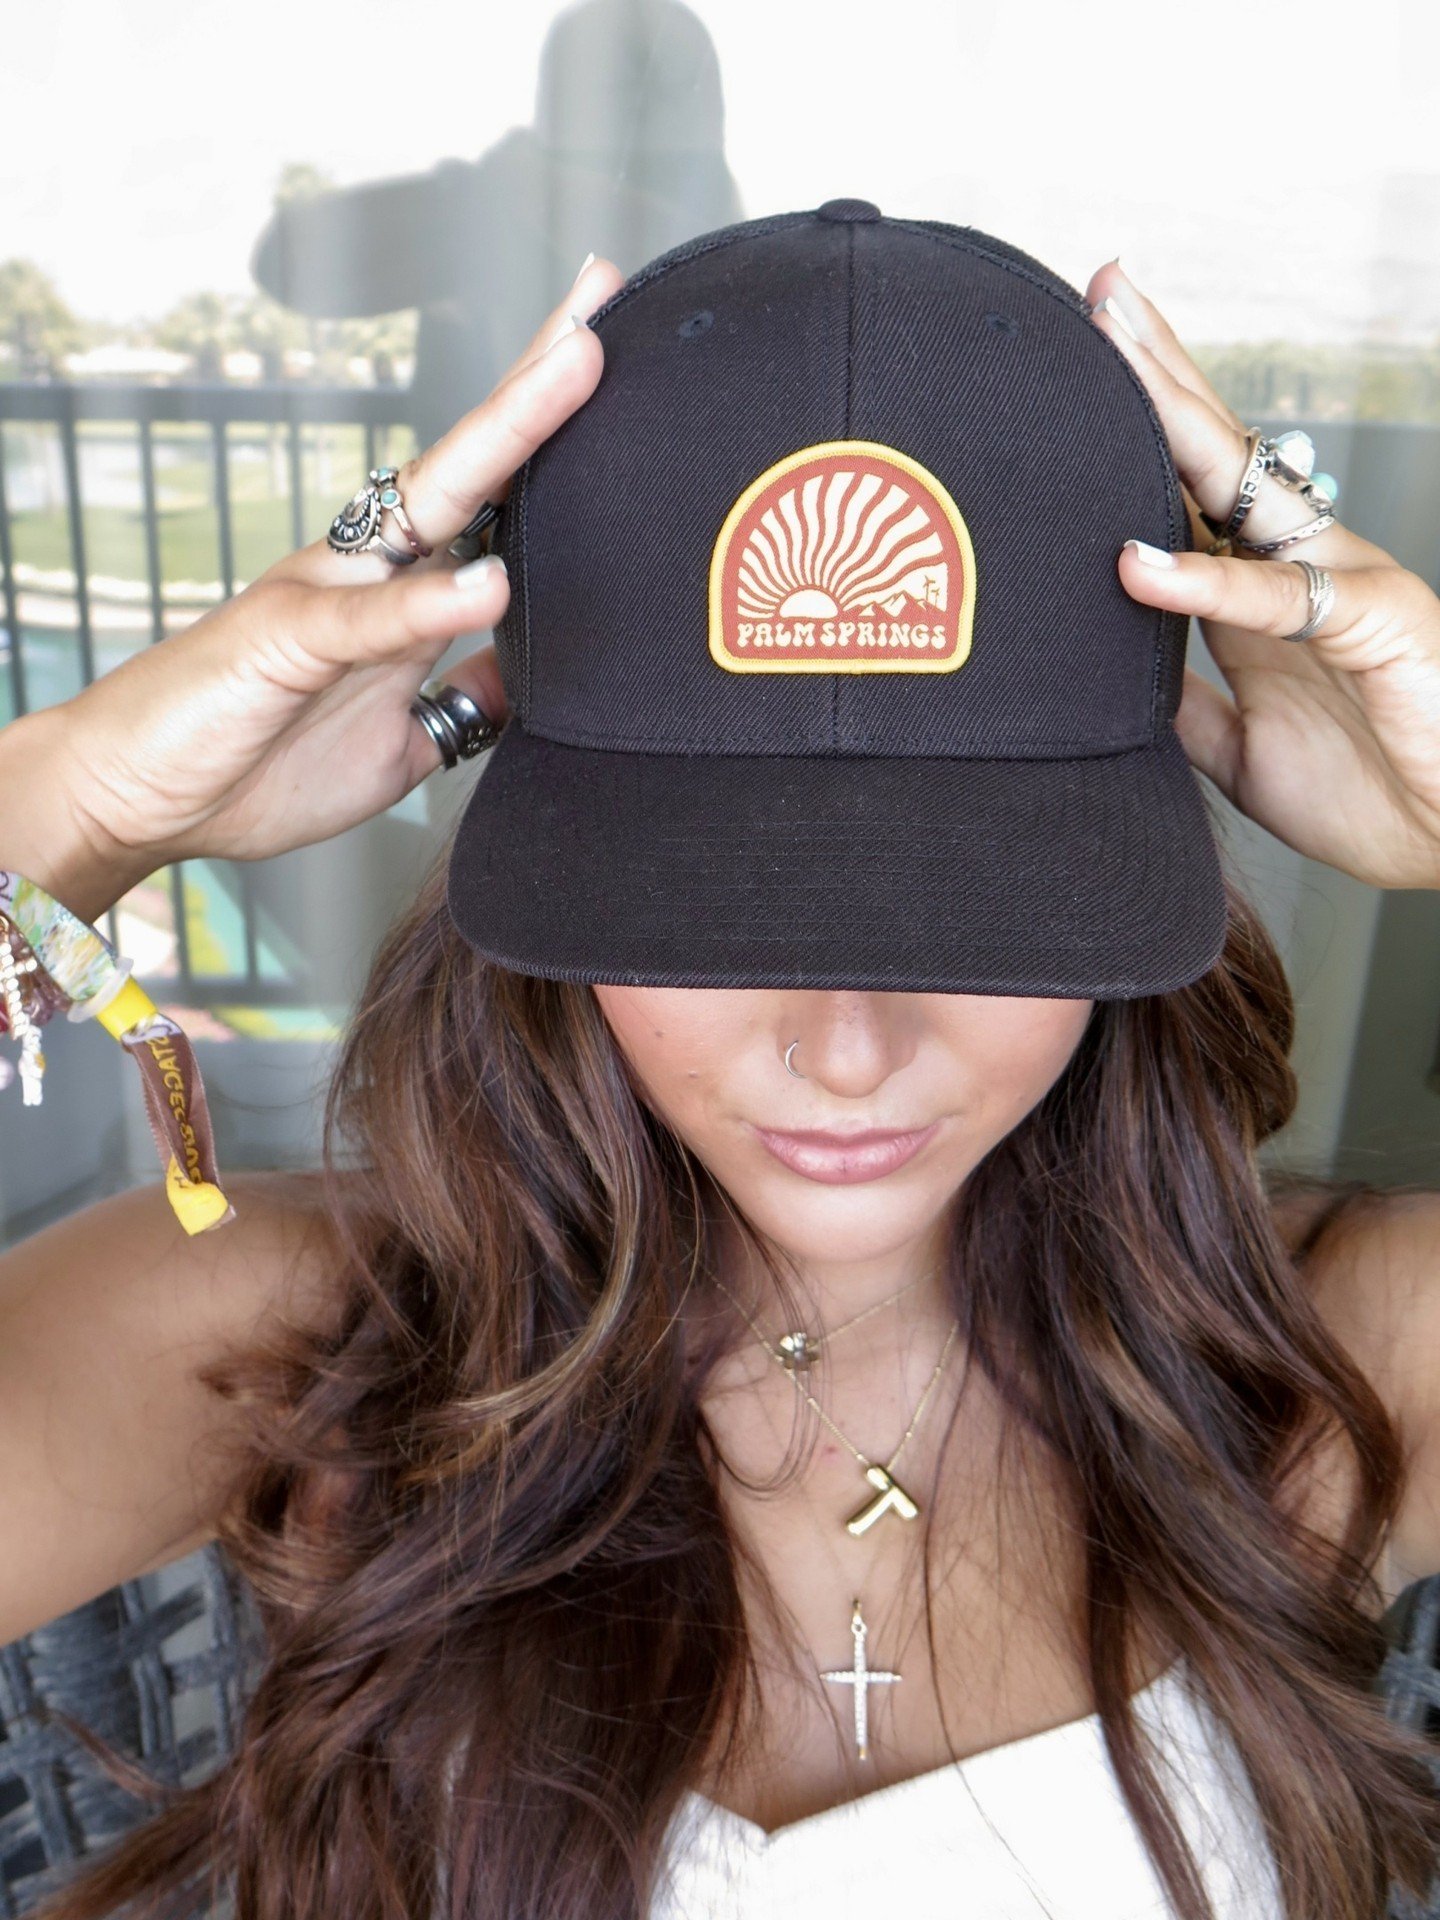 Who needs a cowboy hat for Stagecoach when you've got your Rooted in Palm Springs trucker hat? 🧢☀
*
*
*
*
*
#rootedinpalmsprings #palmsprings #palmspringsy #downtownpalmsprings #palmspringsca #palmspringscalifornia #palmspringslife #palmspringsstyle